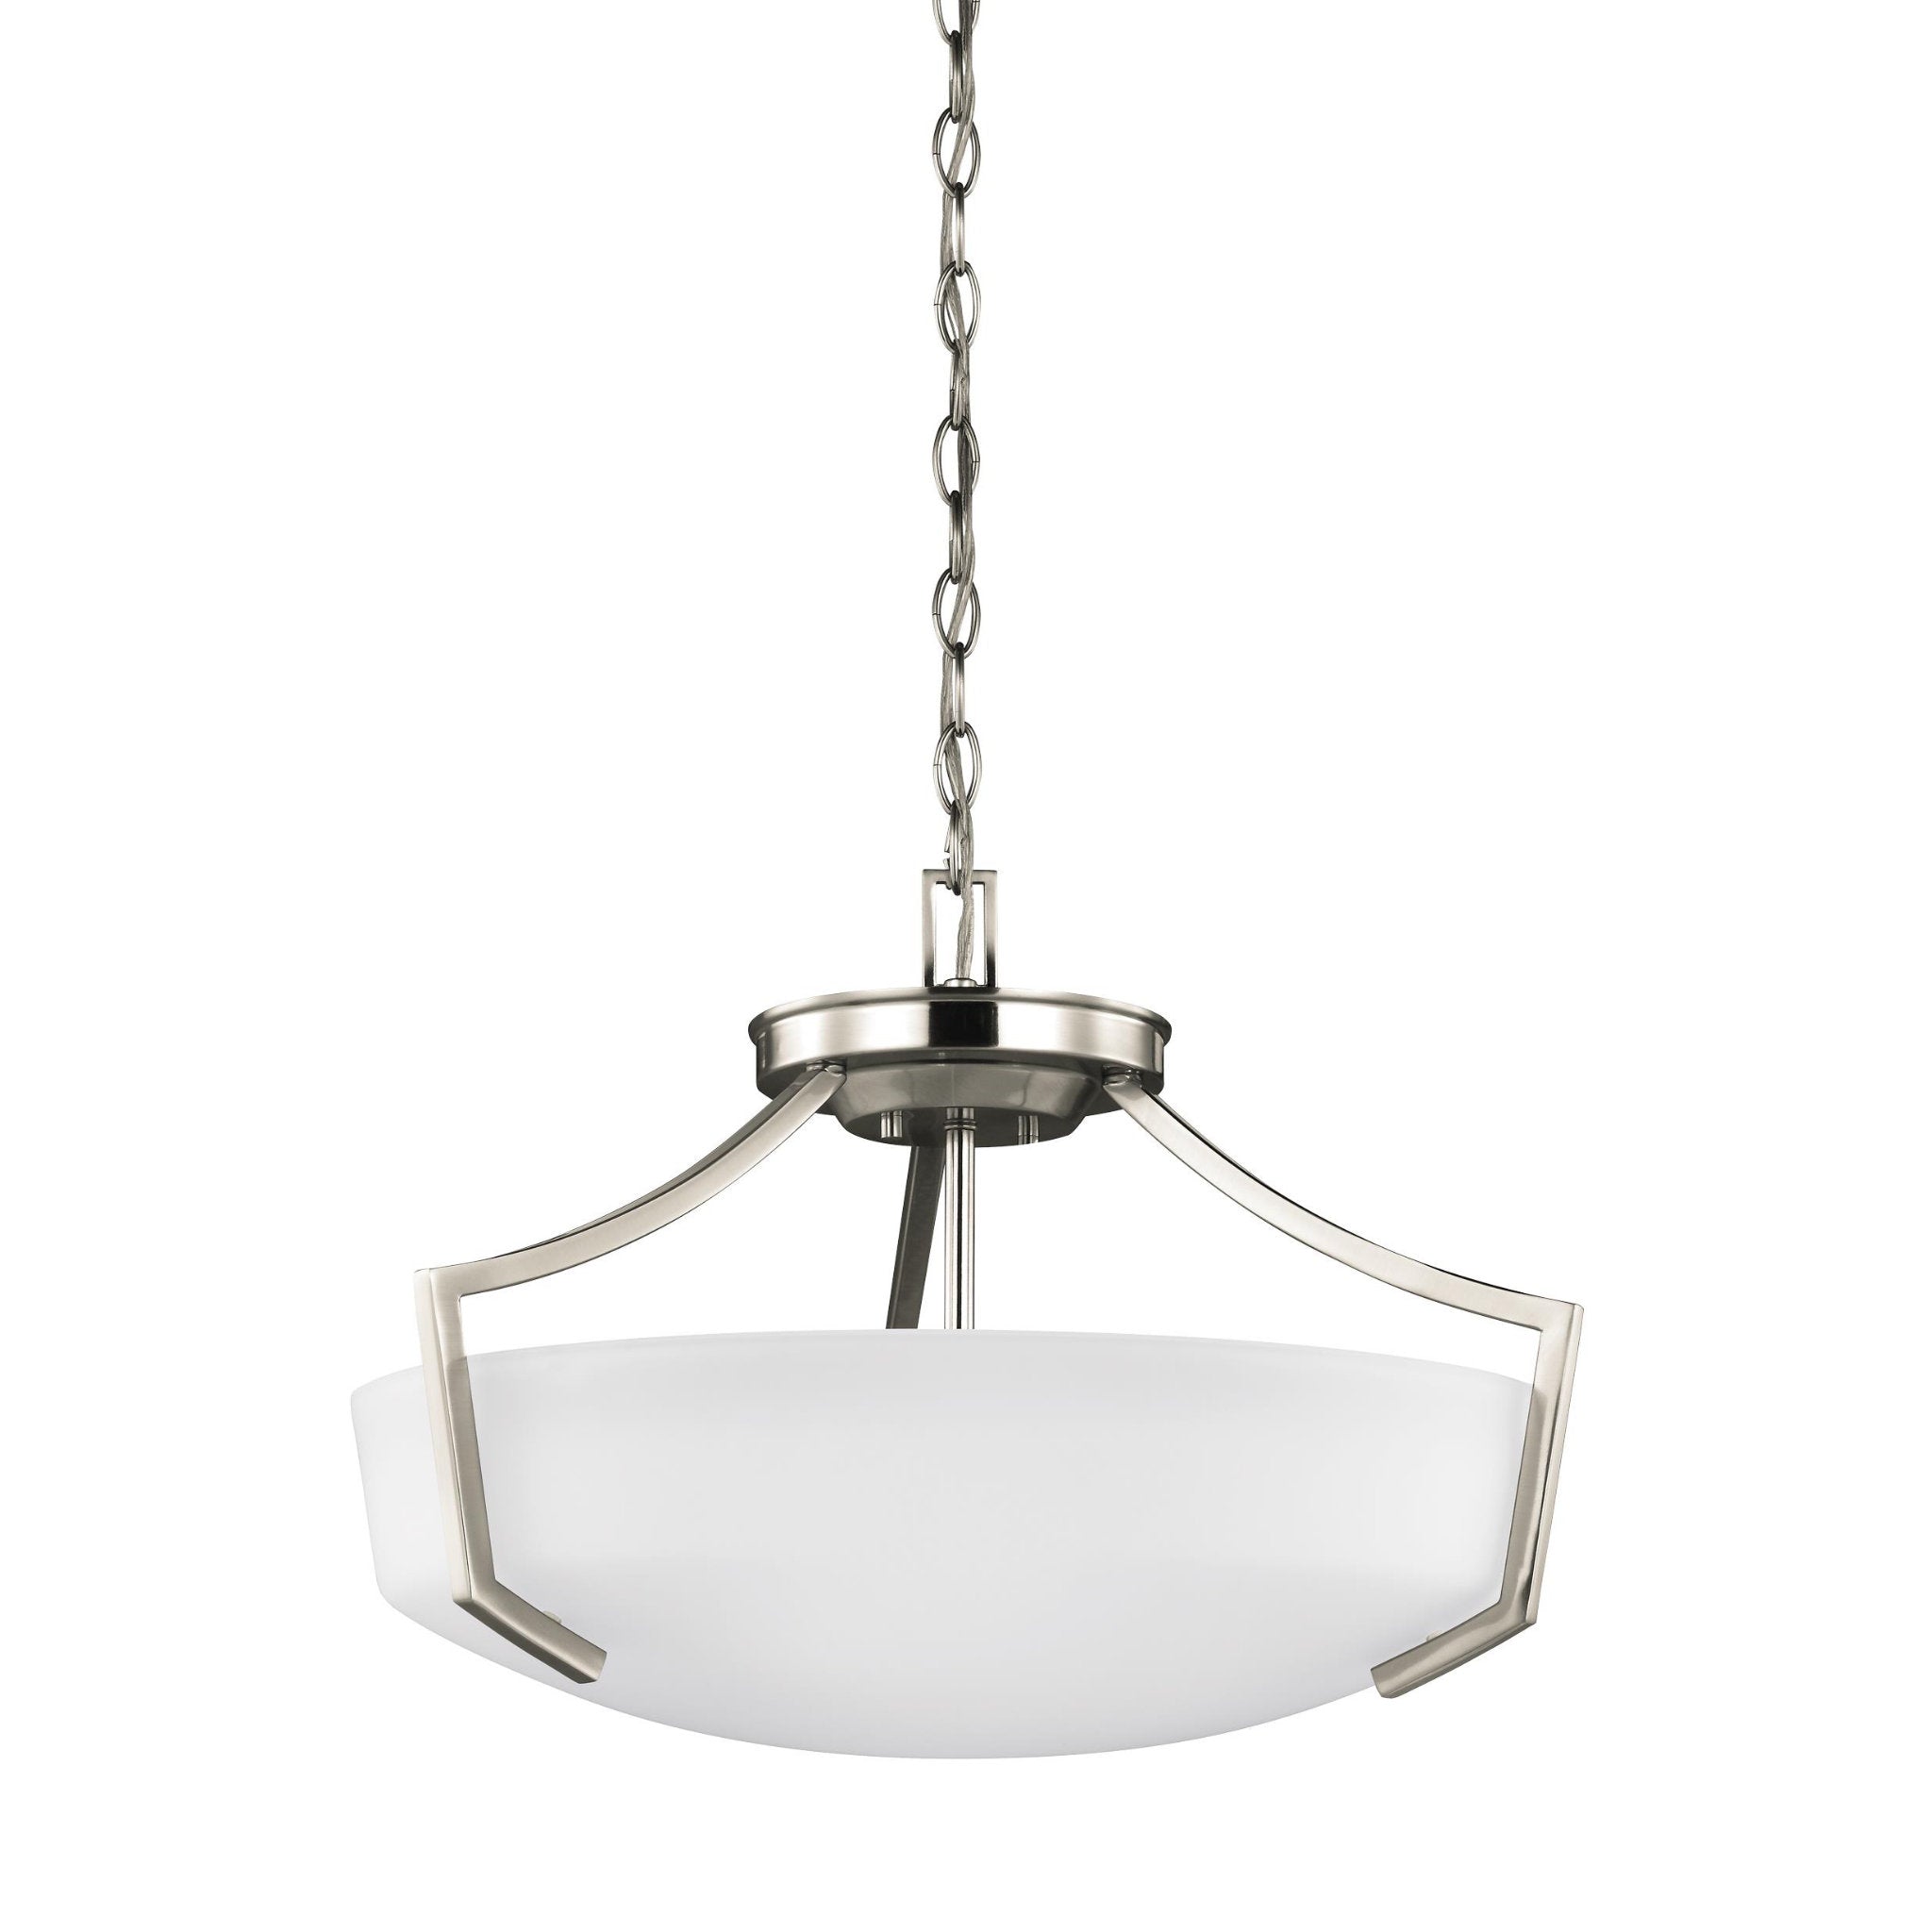 Hanford Three Light Ceiling Convertible Pendant LED Transitional Fixture 14.25" Height Steel Round Satin Etched Shade in Brushed Nickel